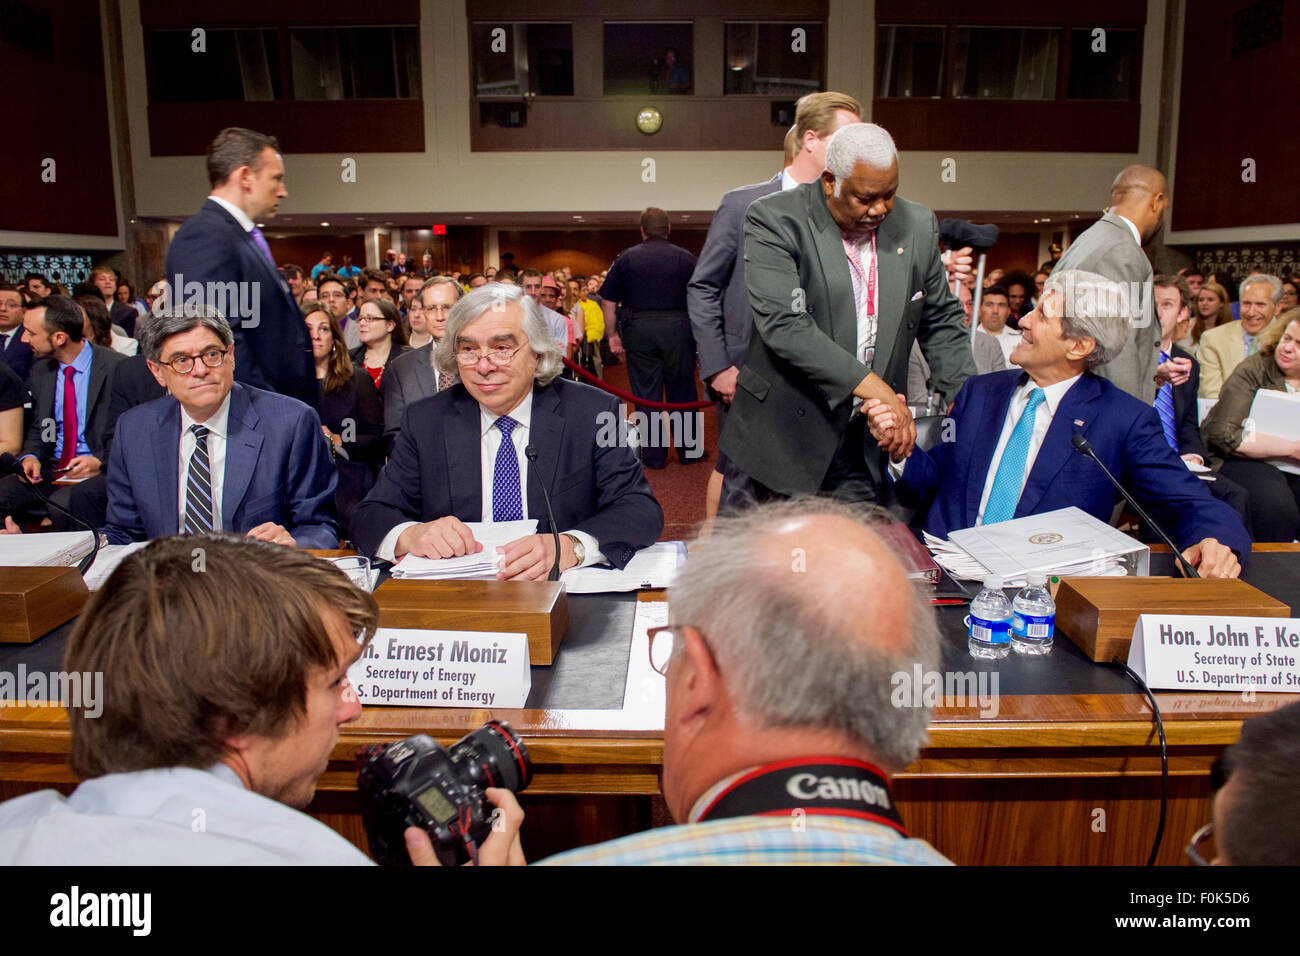 Senate Staffer Greets Secretary Kerry Before Testifying About Iranian Nuclear Deal in Congress Senate Staffer Greets Secretary Kerry Before Testifying About Iranian Nuclear Stock Photo